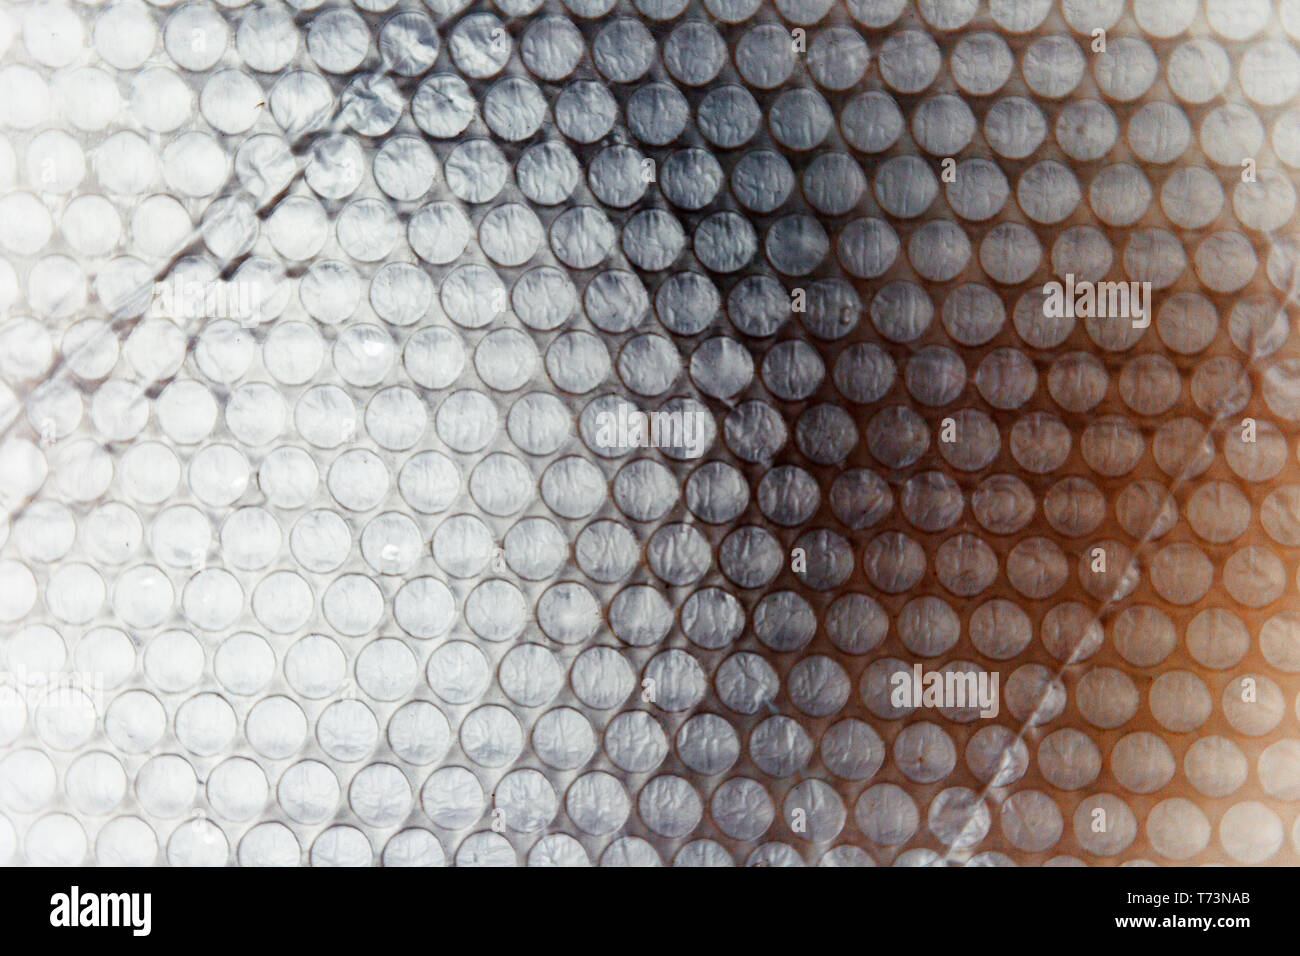 Bubble Wrap Background Wallpaper Stock Image  Image of light packaging  74439877